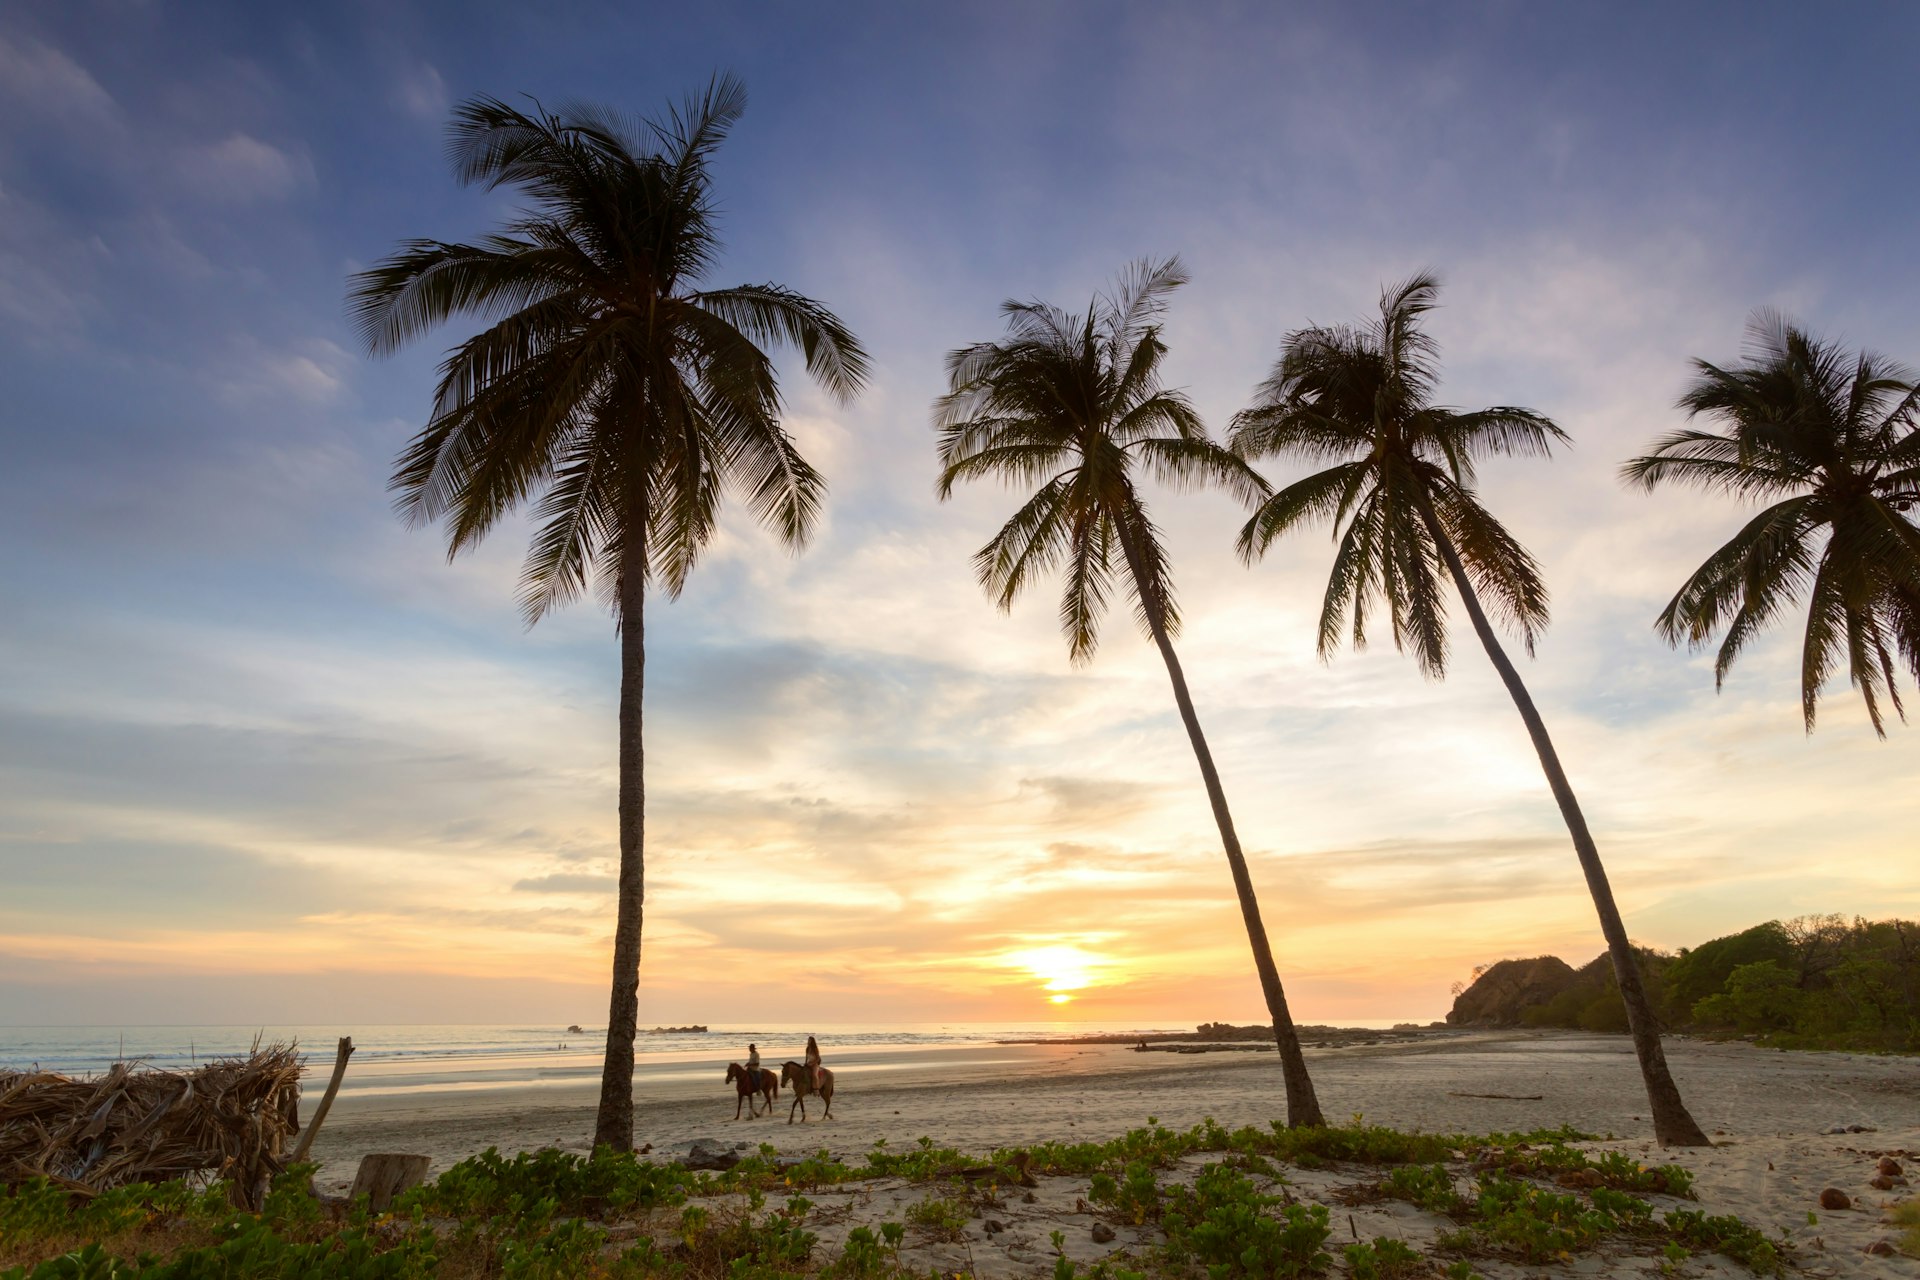 Two people ride horses along a beach at sunset with palm trees towering overhead